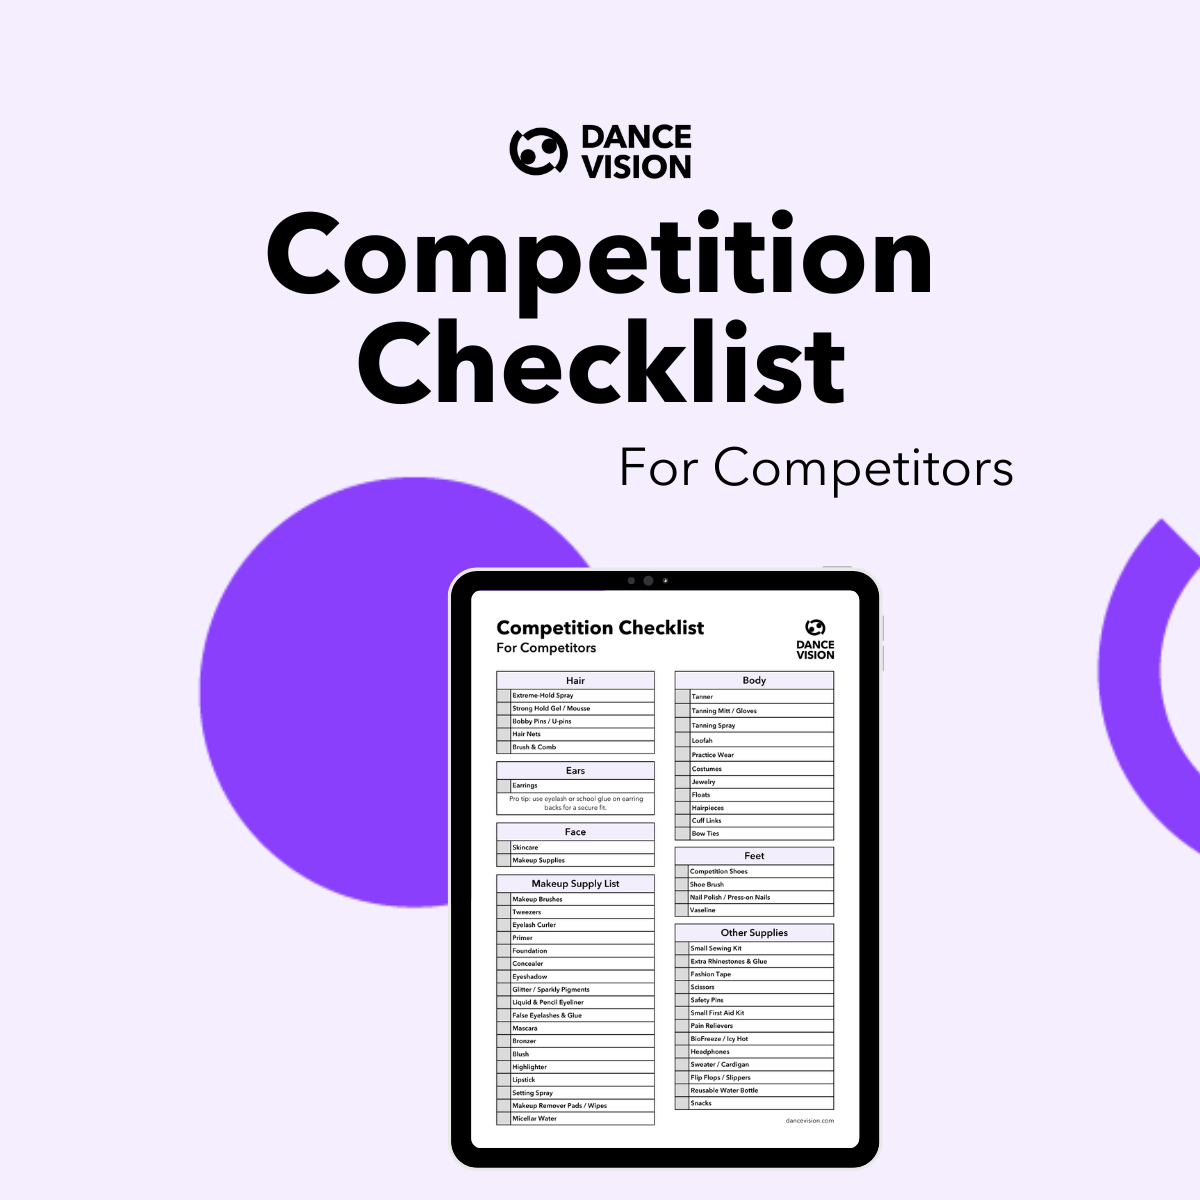 A free checklist for competitors of ballroom dance competitions.